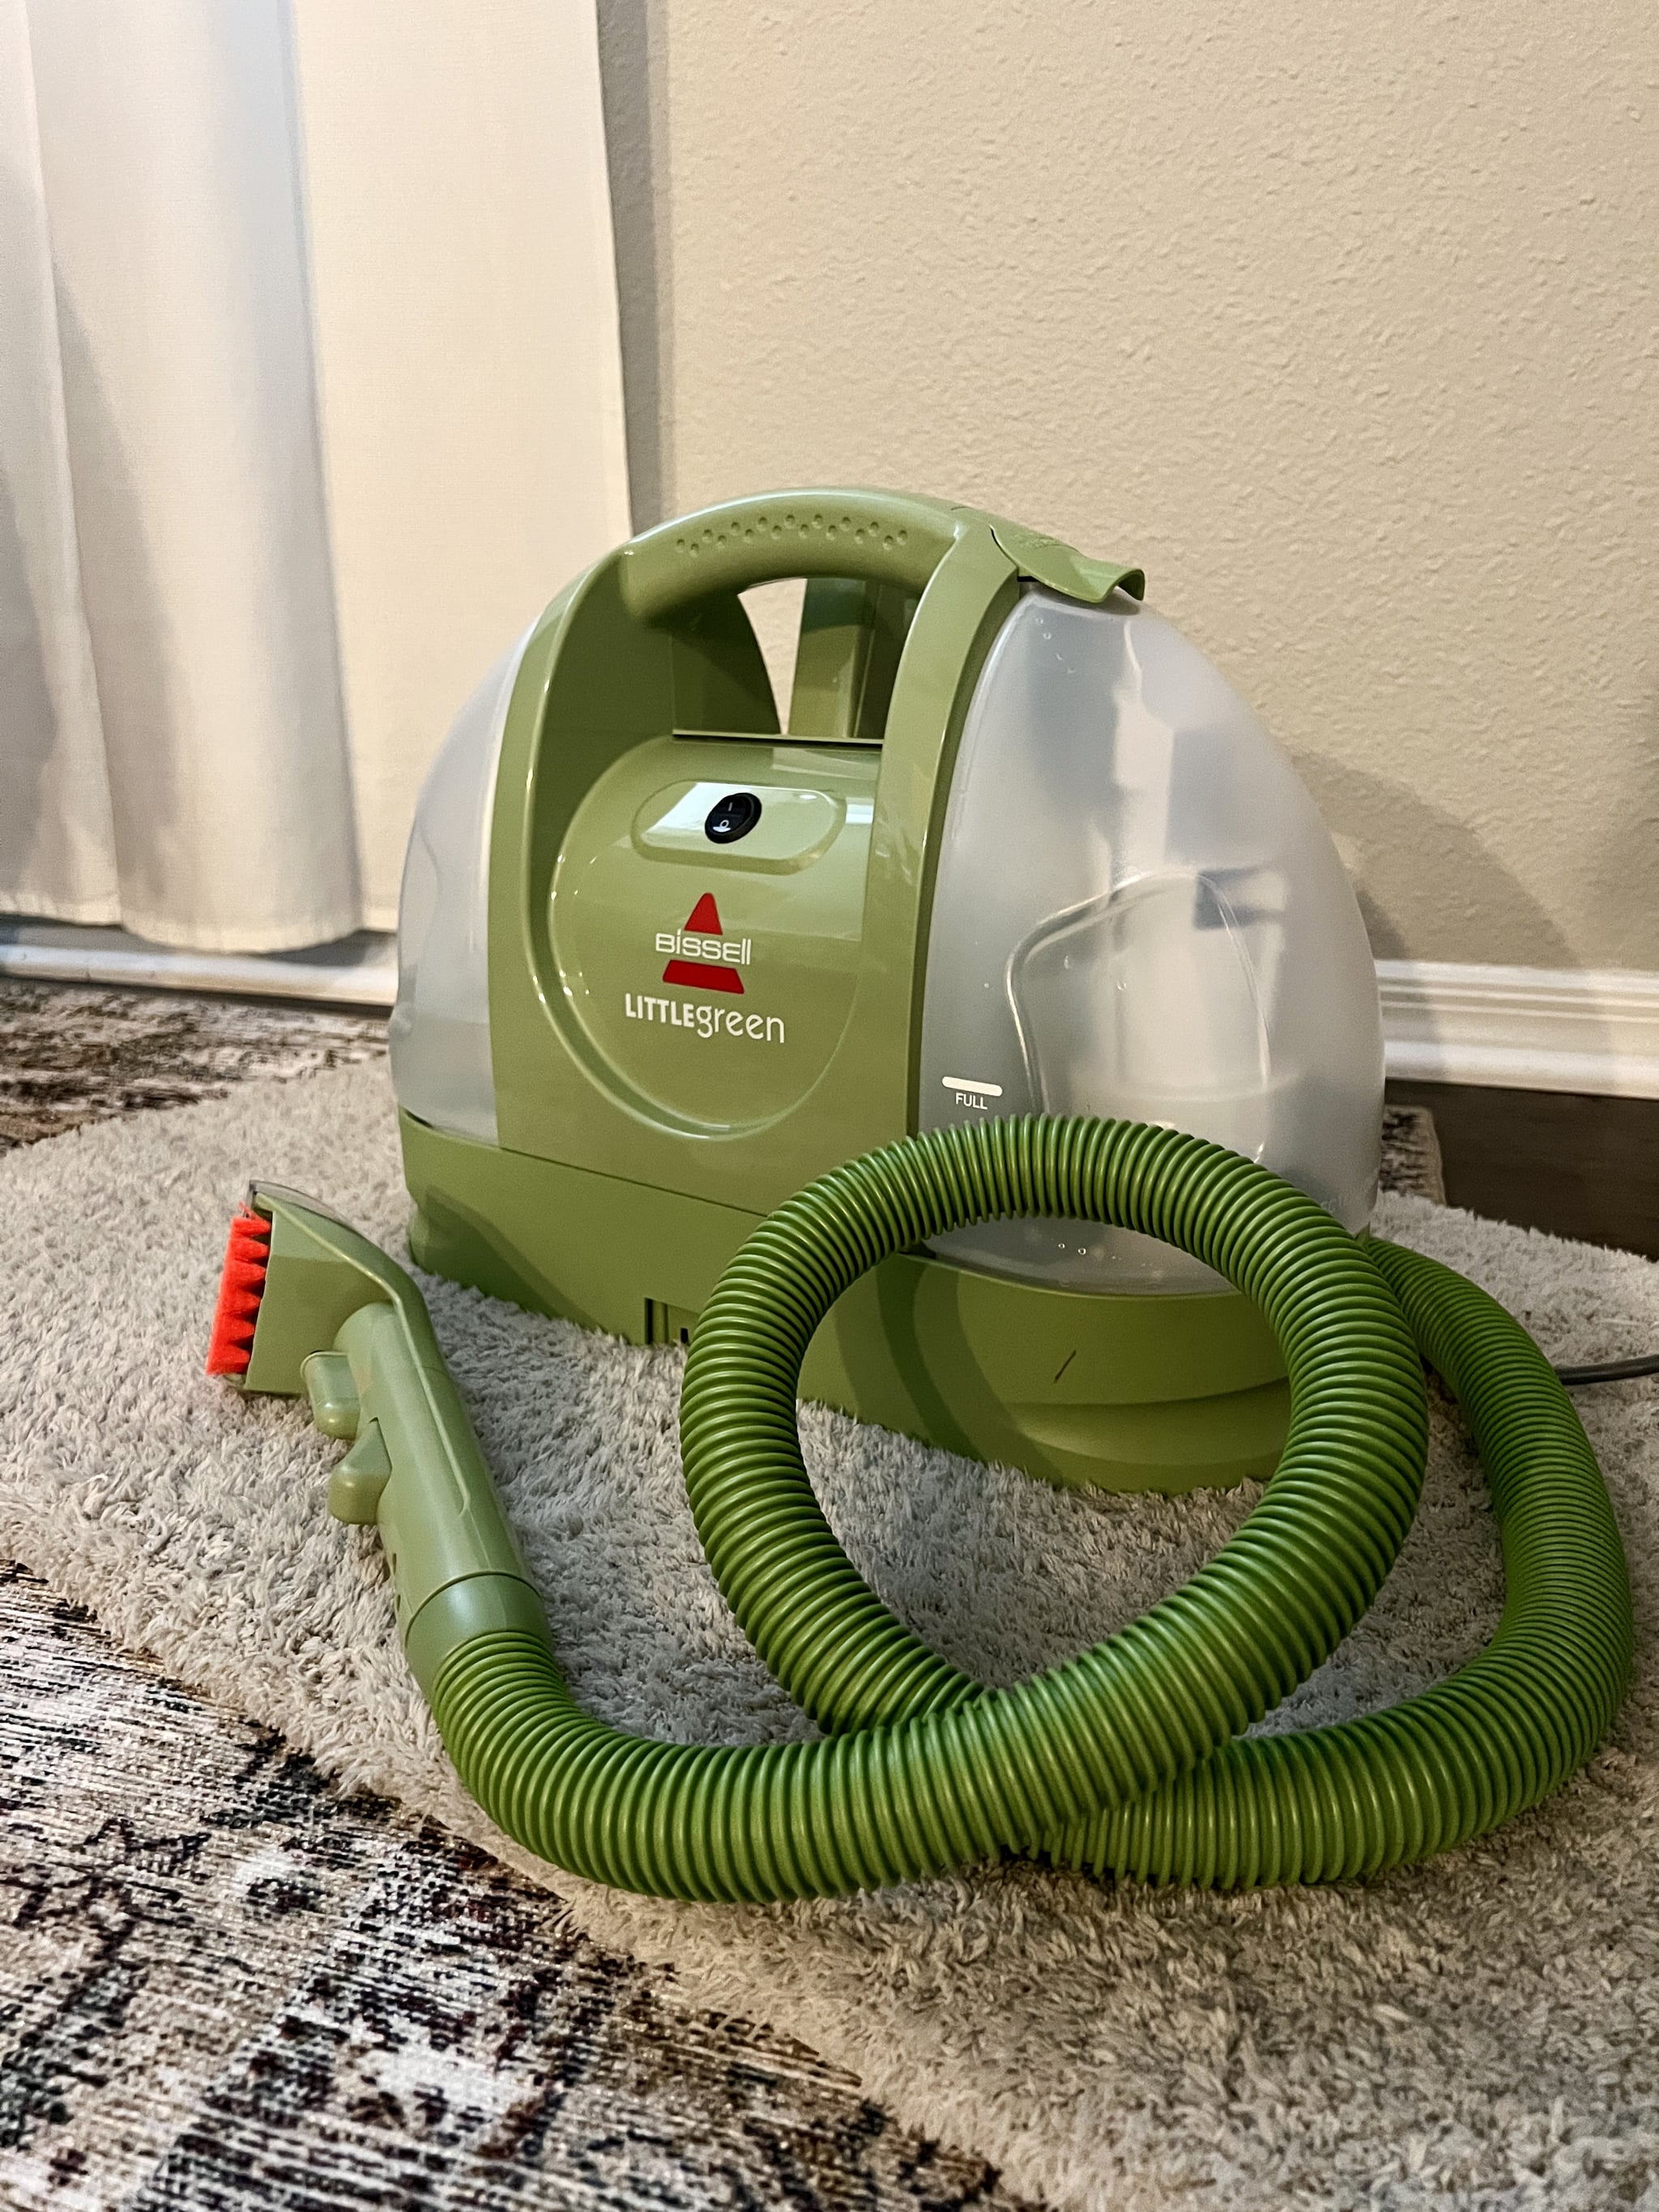 bissell little green carpet cleaner reviews